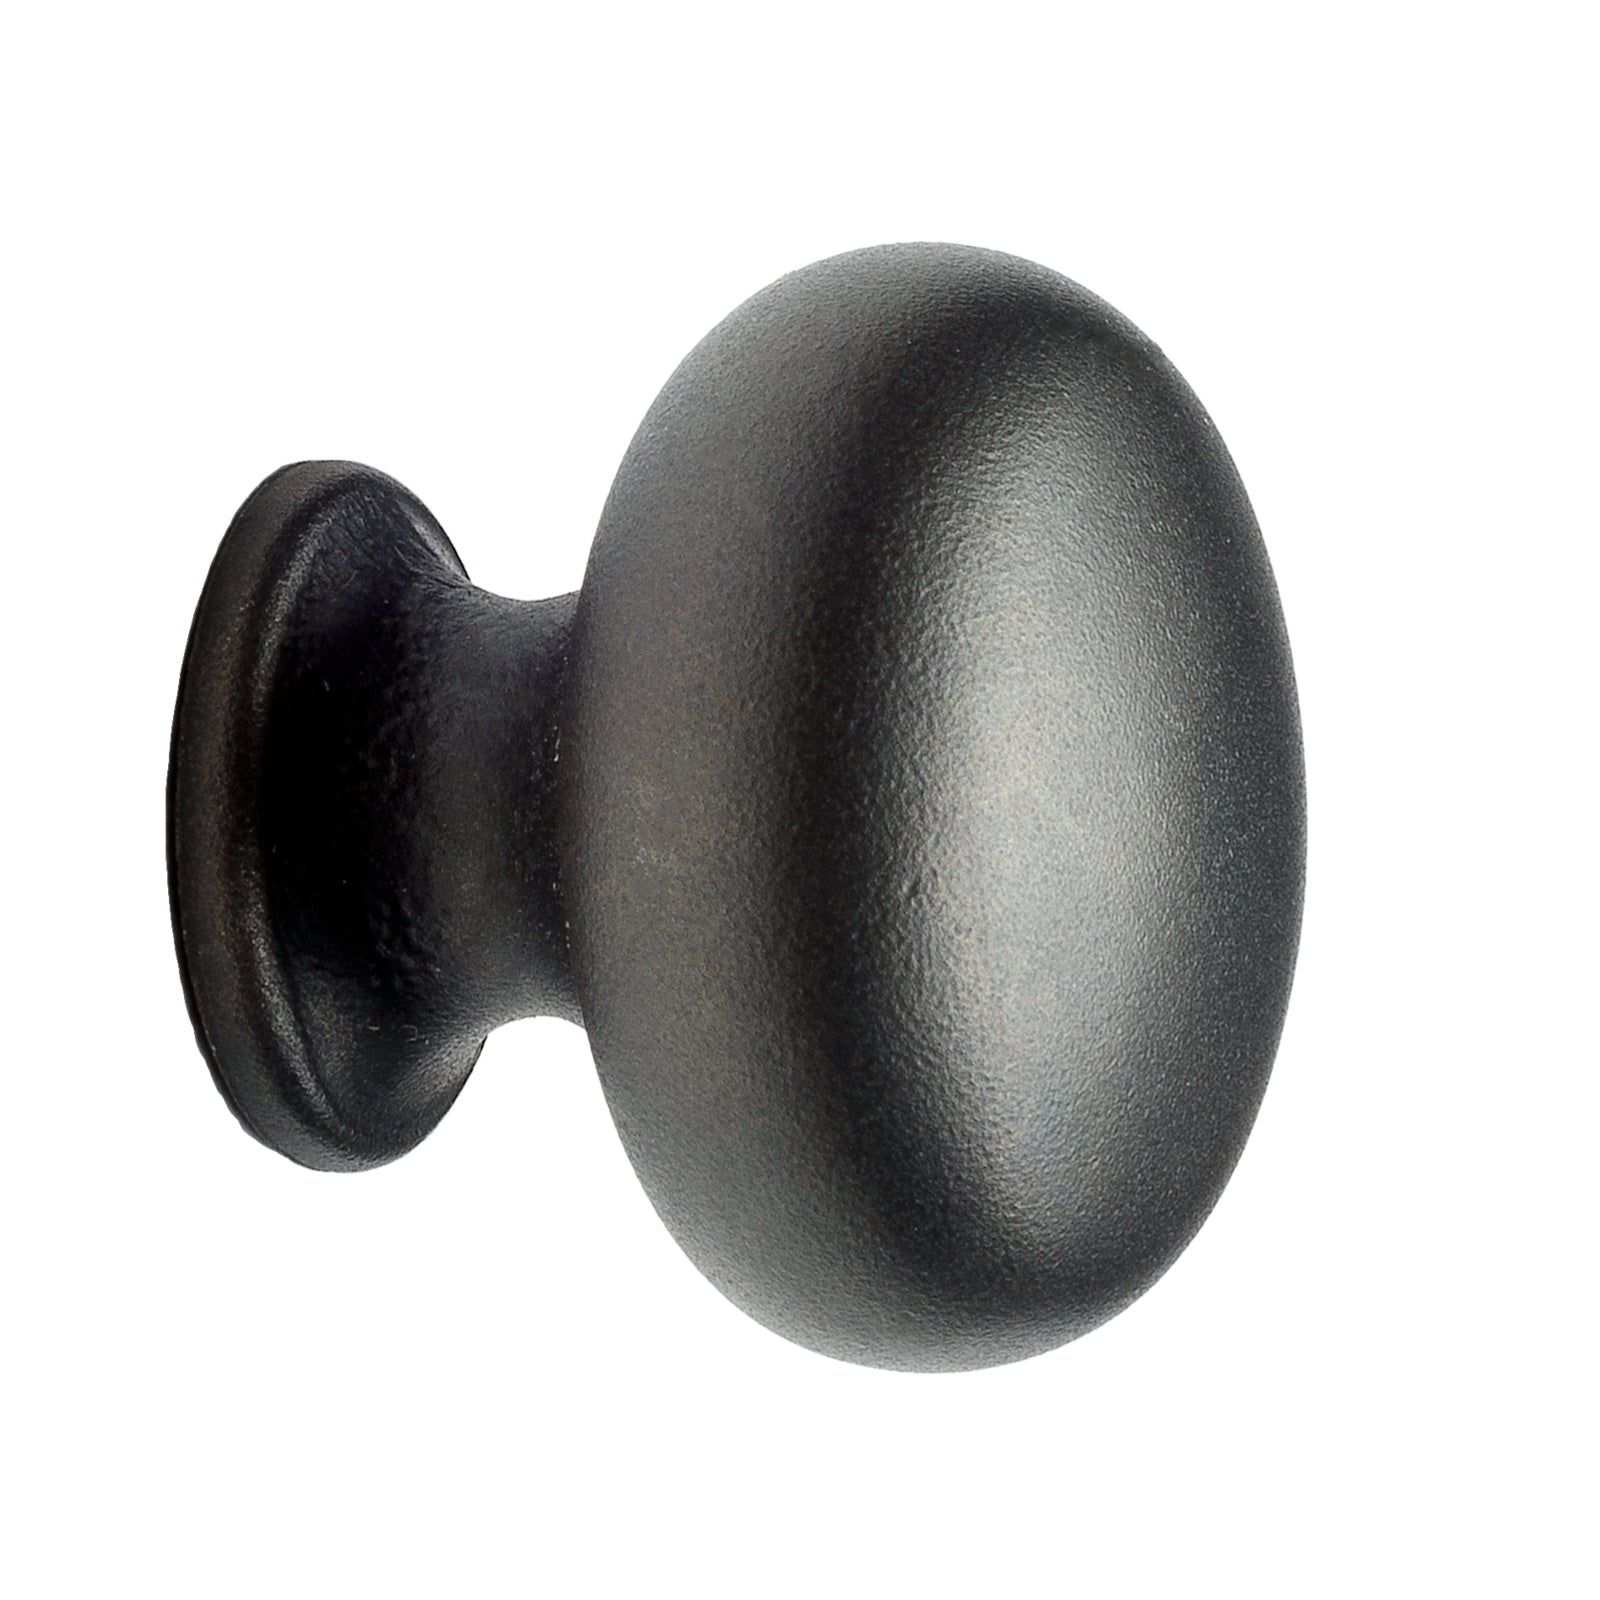 Plymouth Cabinet Knob, 1 3/16" - Discount Rocky Mountain Hardware